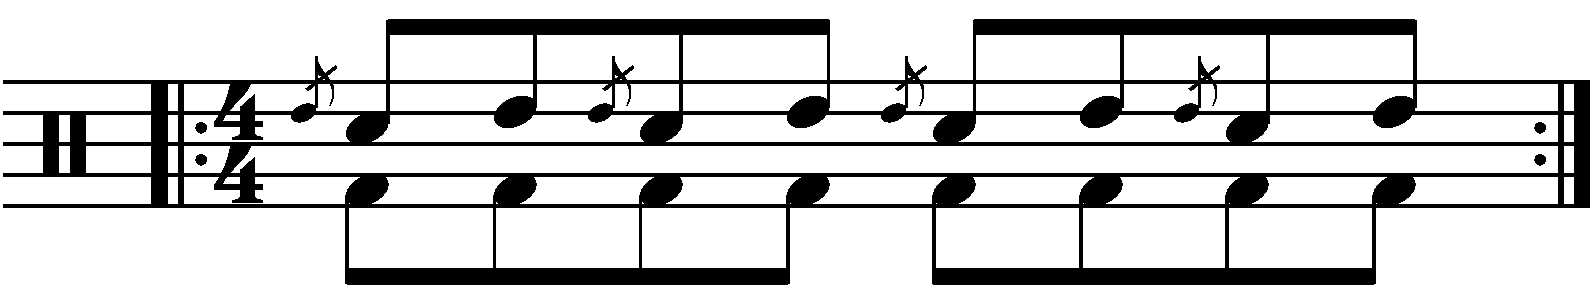 Flam tap with each hand playing a different drum